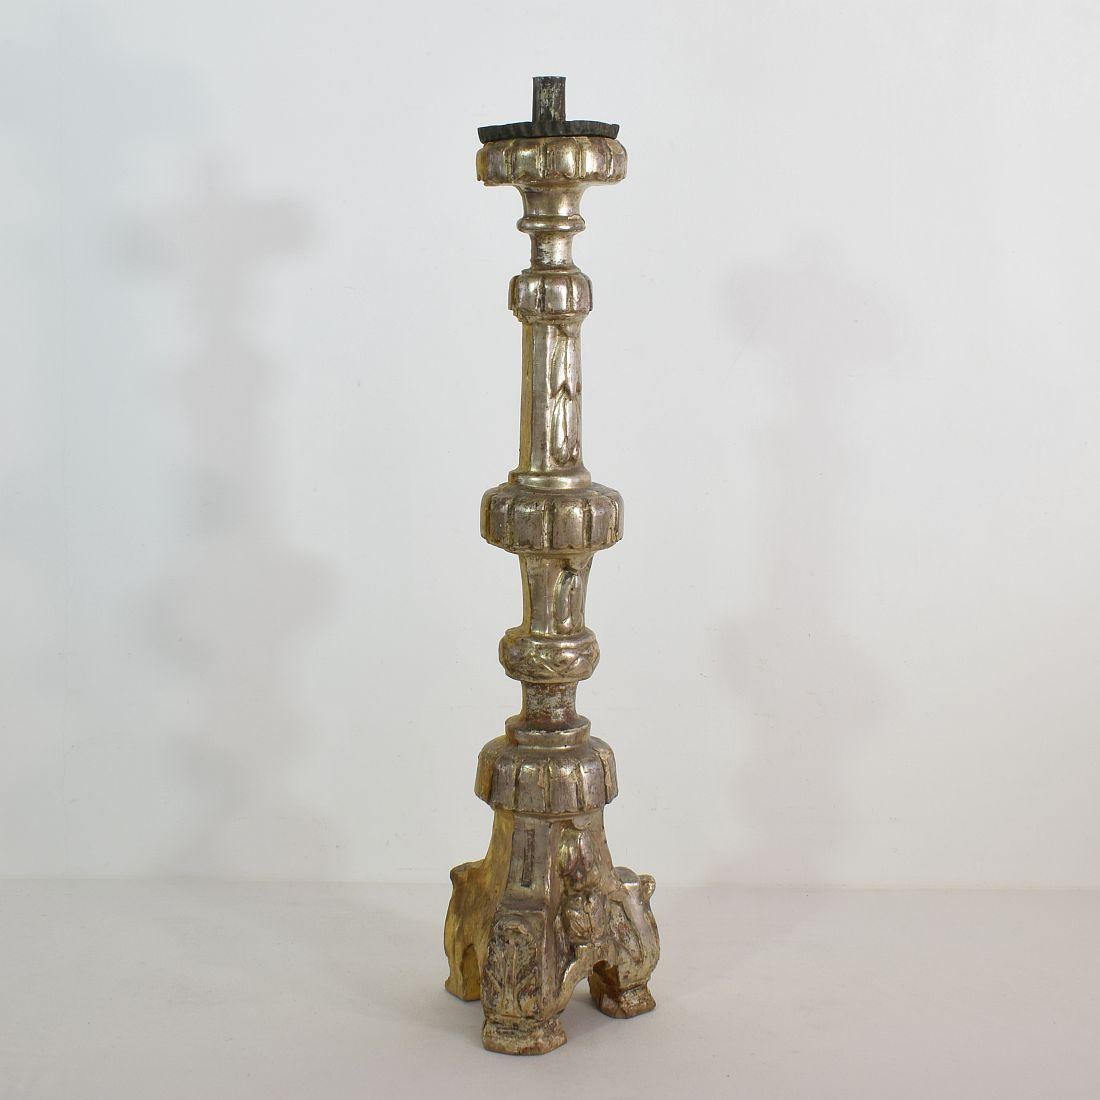 Hand-Carved Italian 18th Century Neoclassical Silvered Candlestick